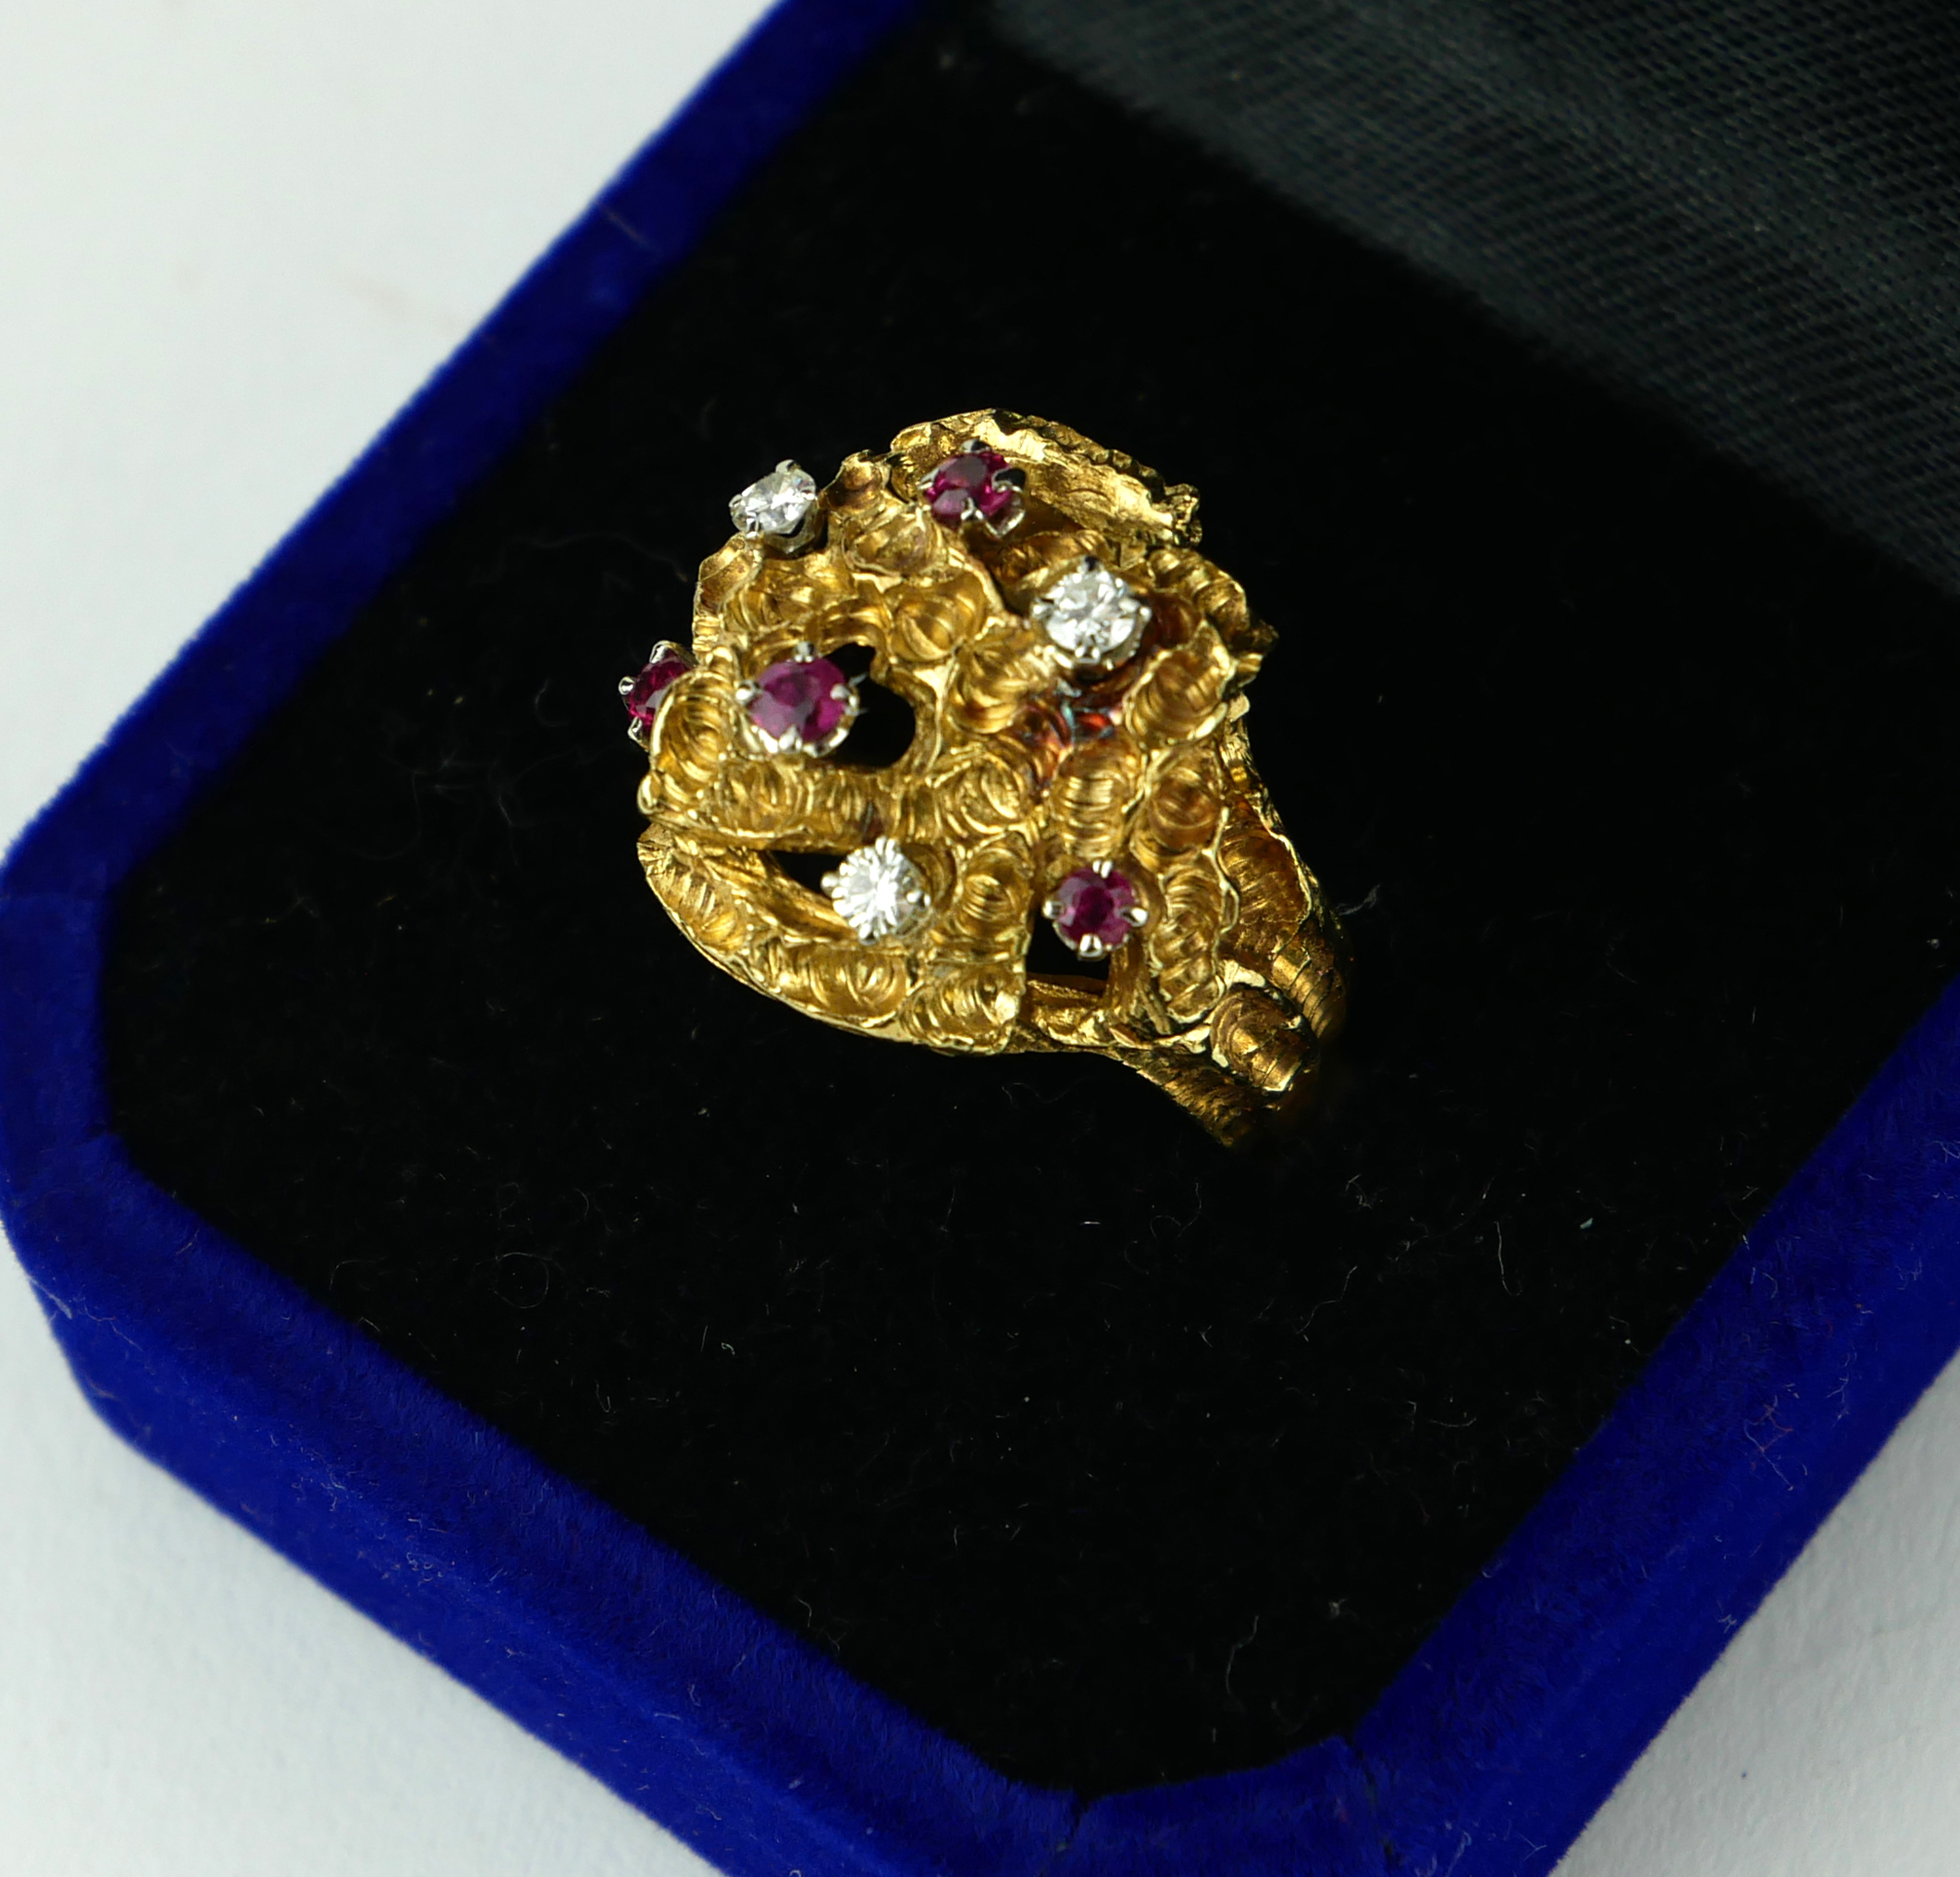 AN 18CT GOLD, RUBY AND DIAMOND RING, CIRCA 1960 (size K½).